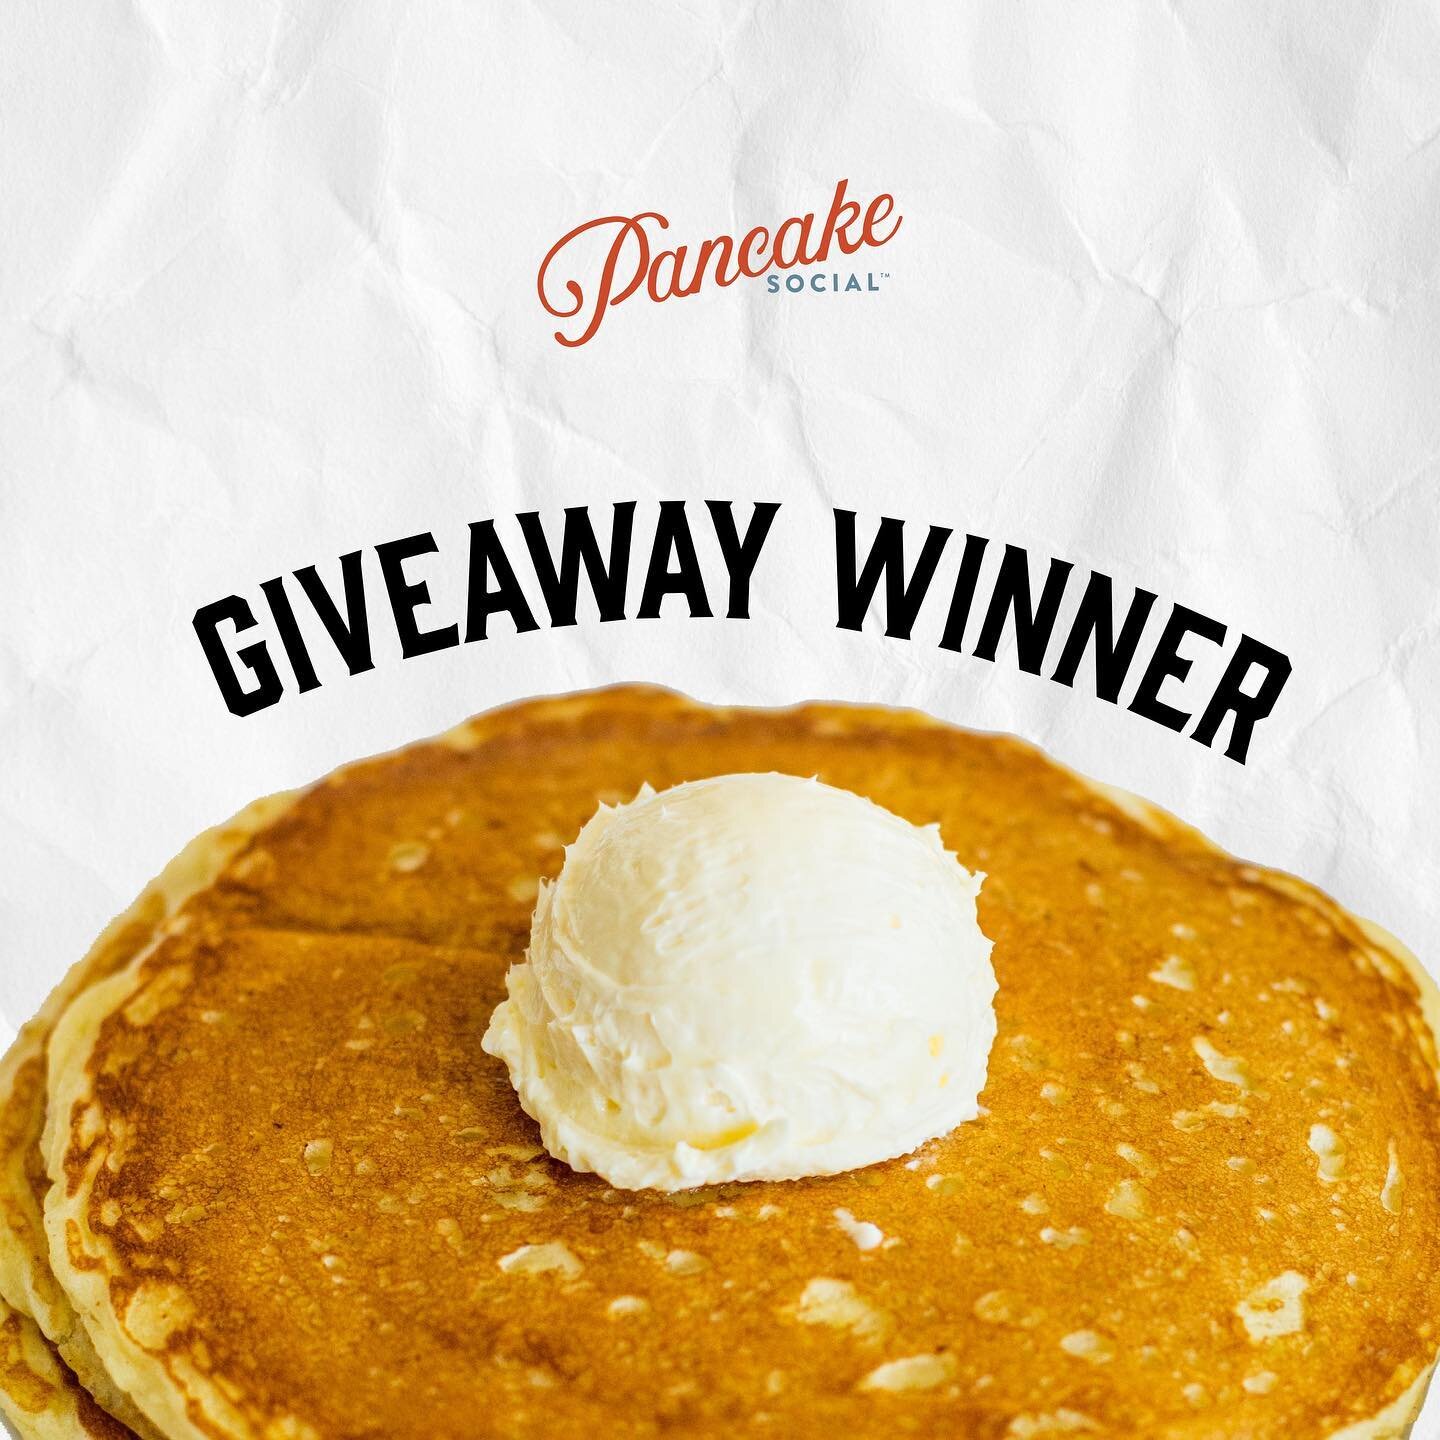 🏆 AND THE WINNER IS... 🏆 We're excited to announce that the winner of our Pancake Social giveaway is @janaeinnis! Thank you to everyone who participated - stay tuned for more chances to win in the future. Congratulations @janaeinnis! 🎉